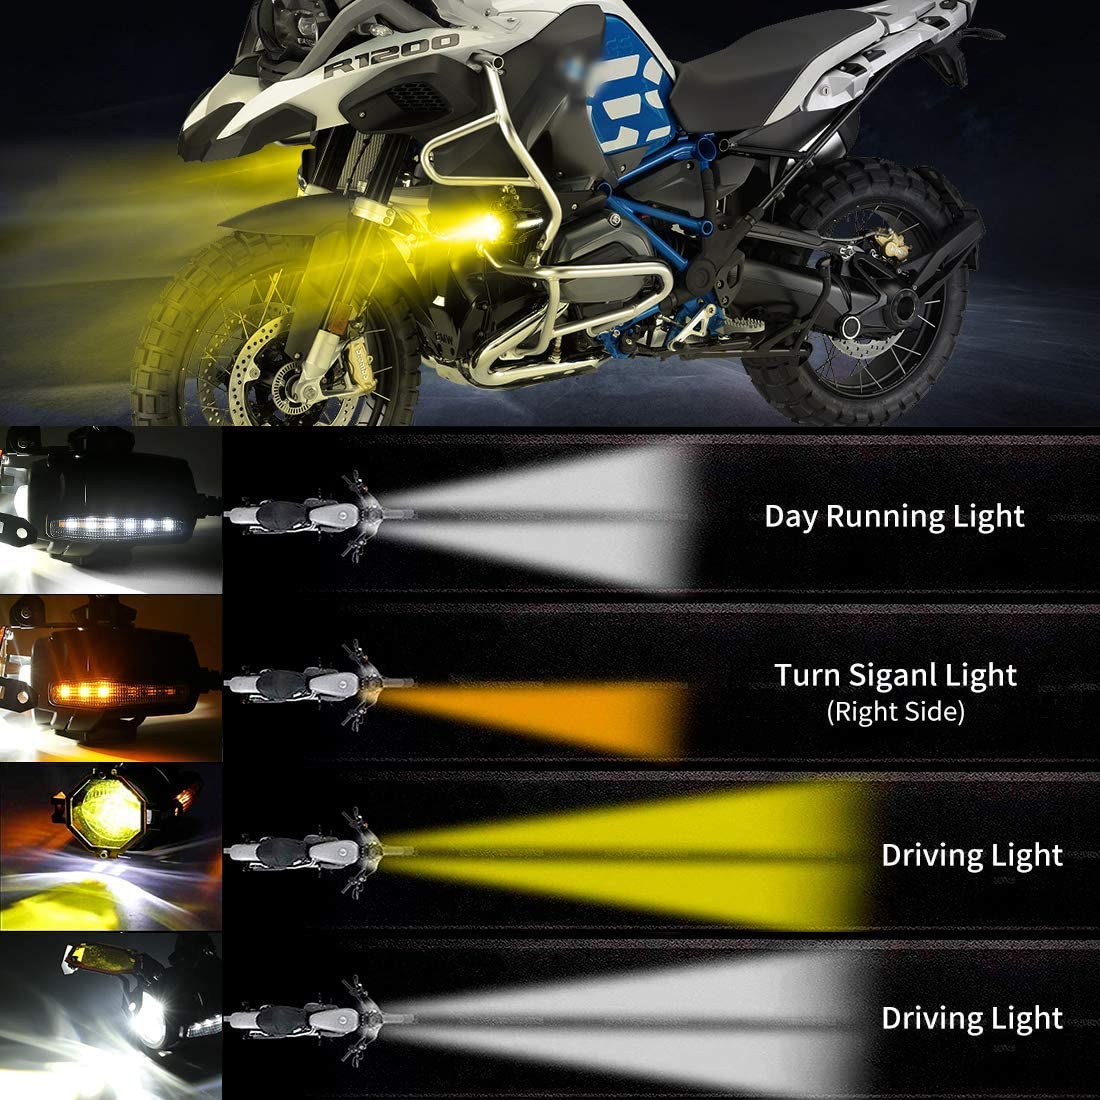 Replacement LED Motorcycle Auxiliary Fog Light Assemblie Driving Lamp With DRL Turn Signal Light Brackets for R1200GS/ADV/F800GS